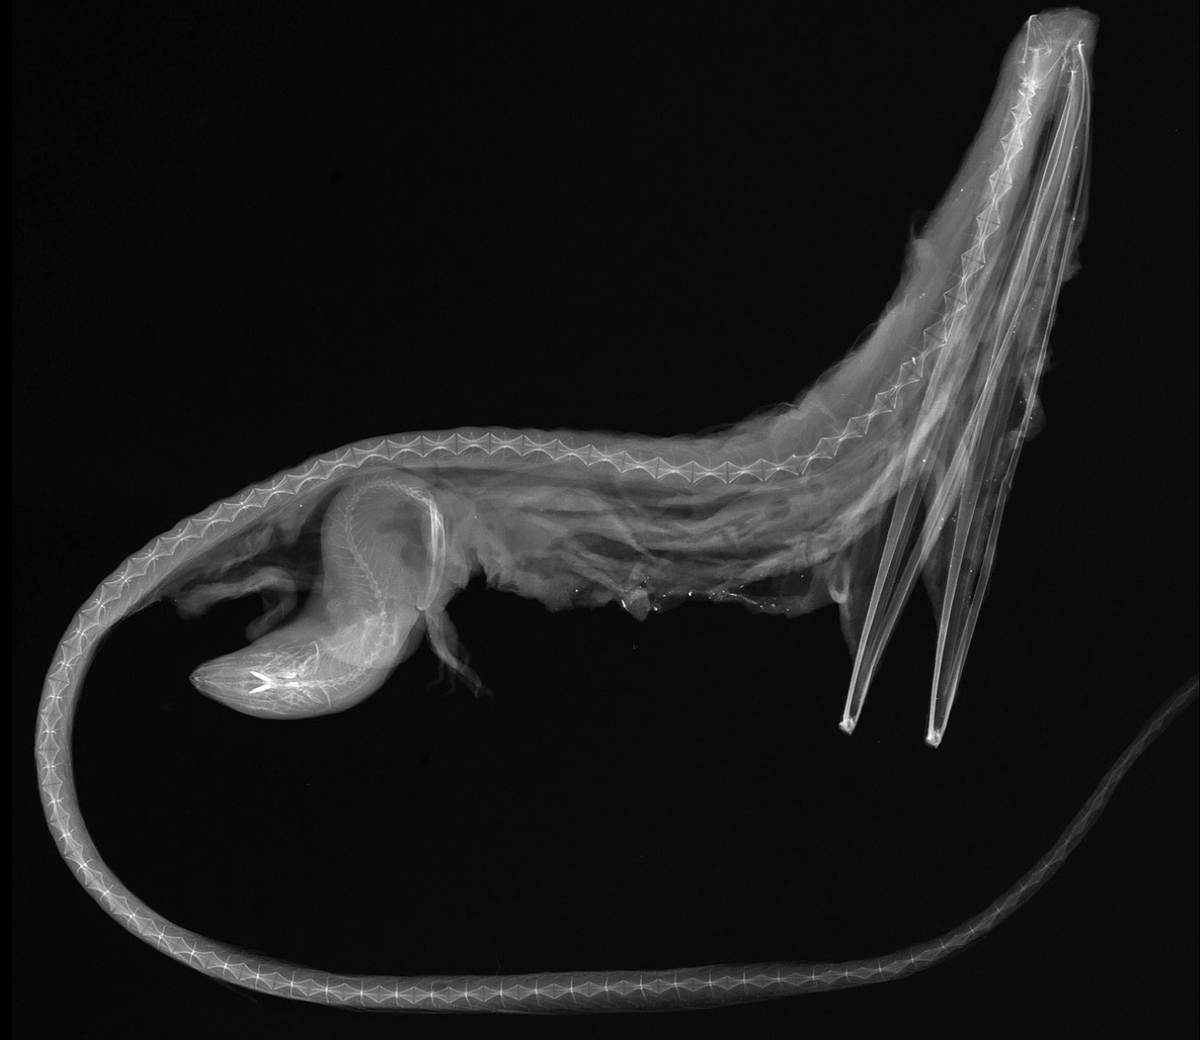 XRAY GULPER EEL STYLE. Check out those jaws! And that second fish! Image = wiki